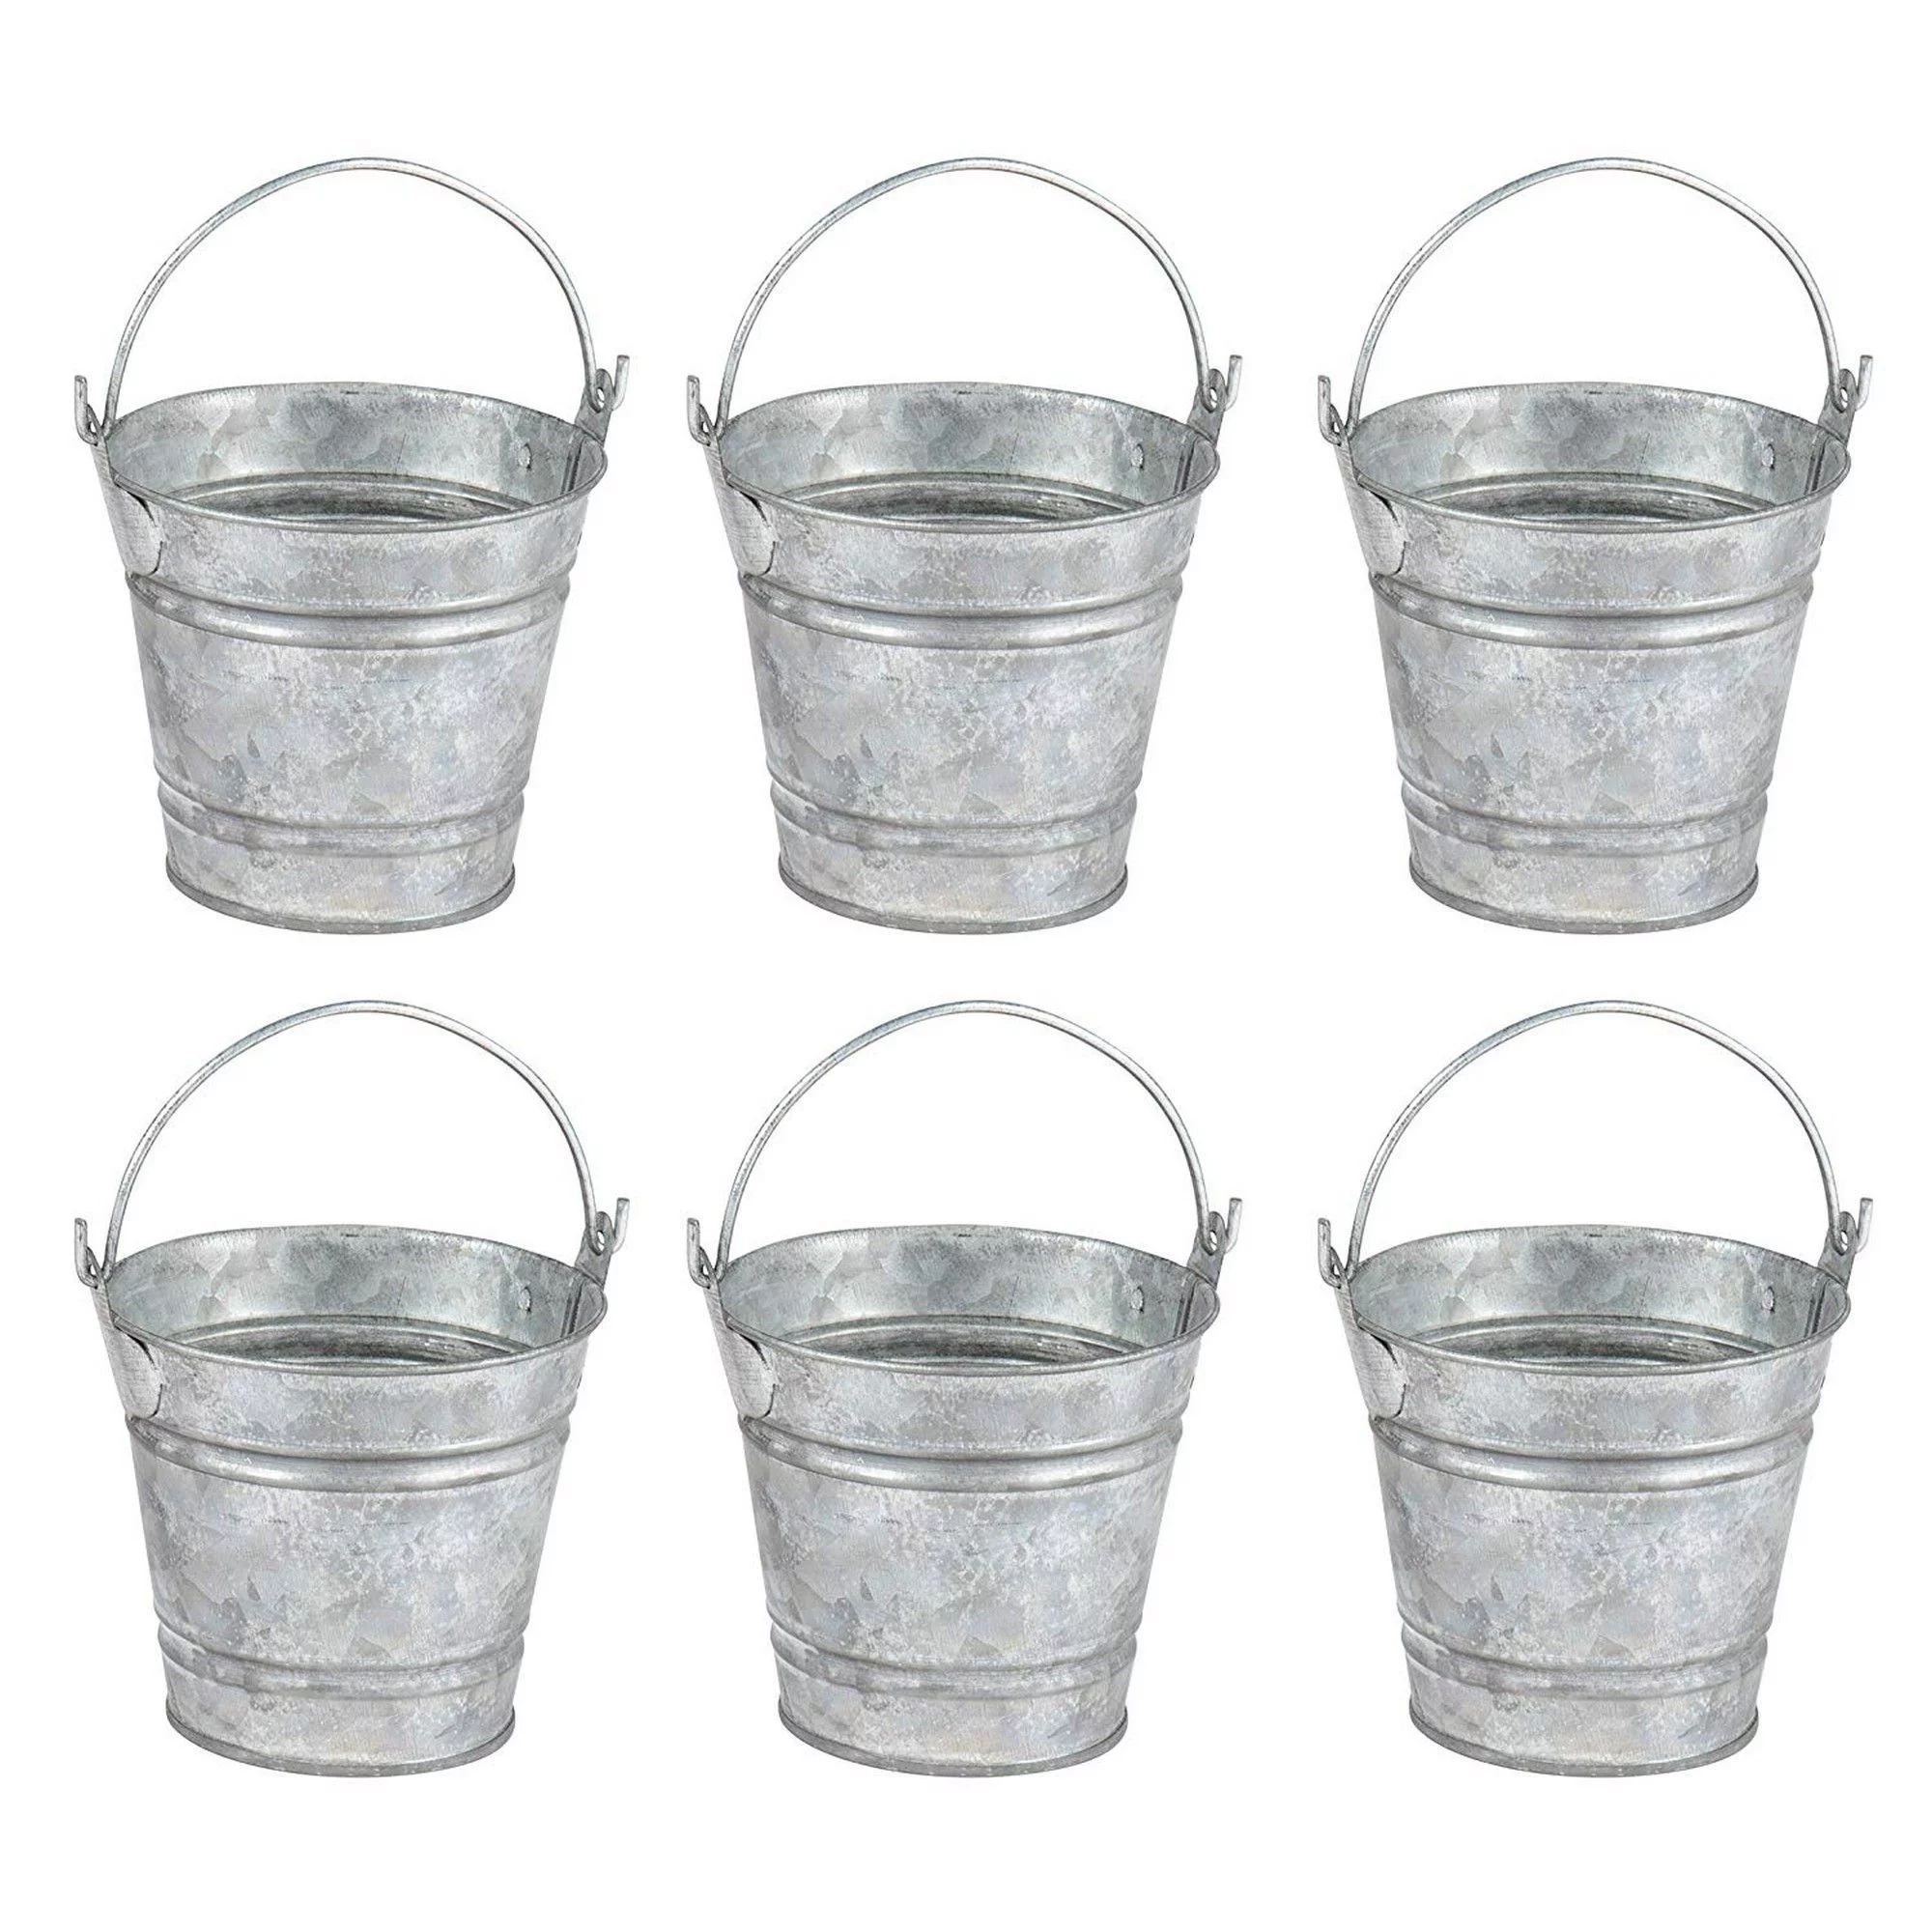 6-Pack Mini Metal Buckets with Handles, Party Tin Pail Containers for Summer Party Favors, 2.8 x ... | Walmart (US)